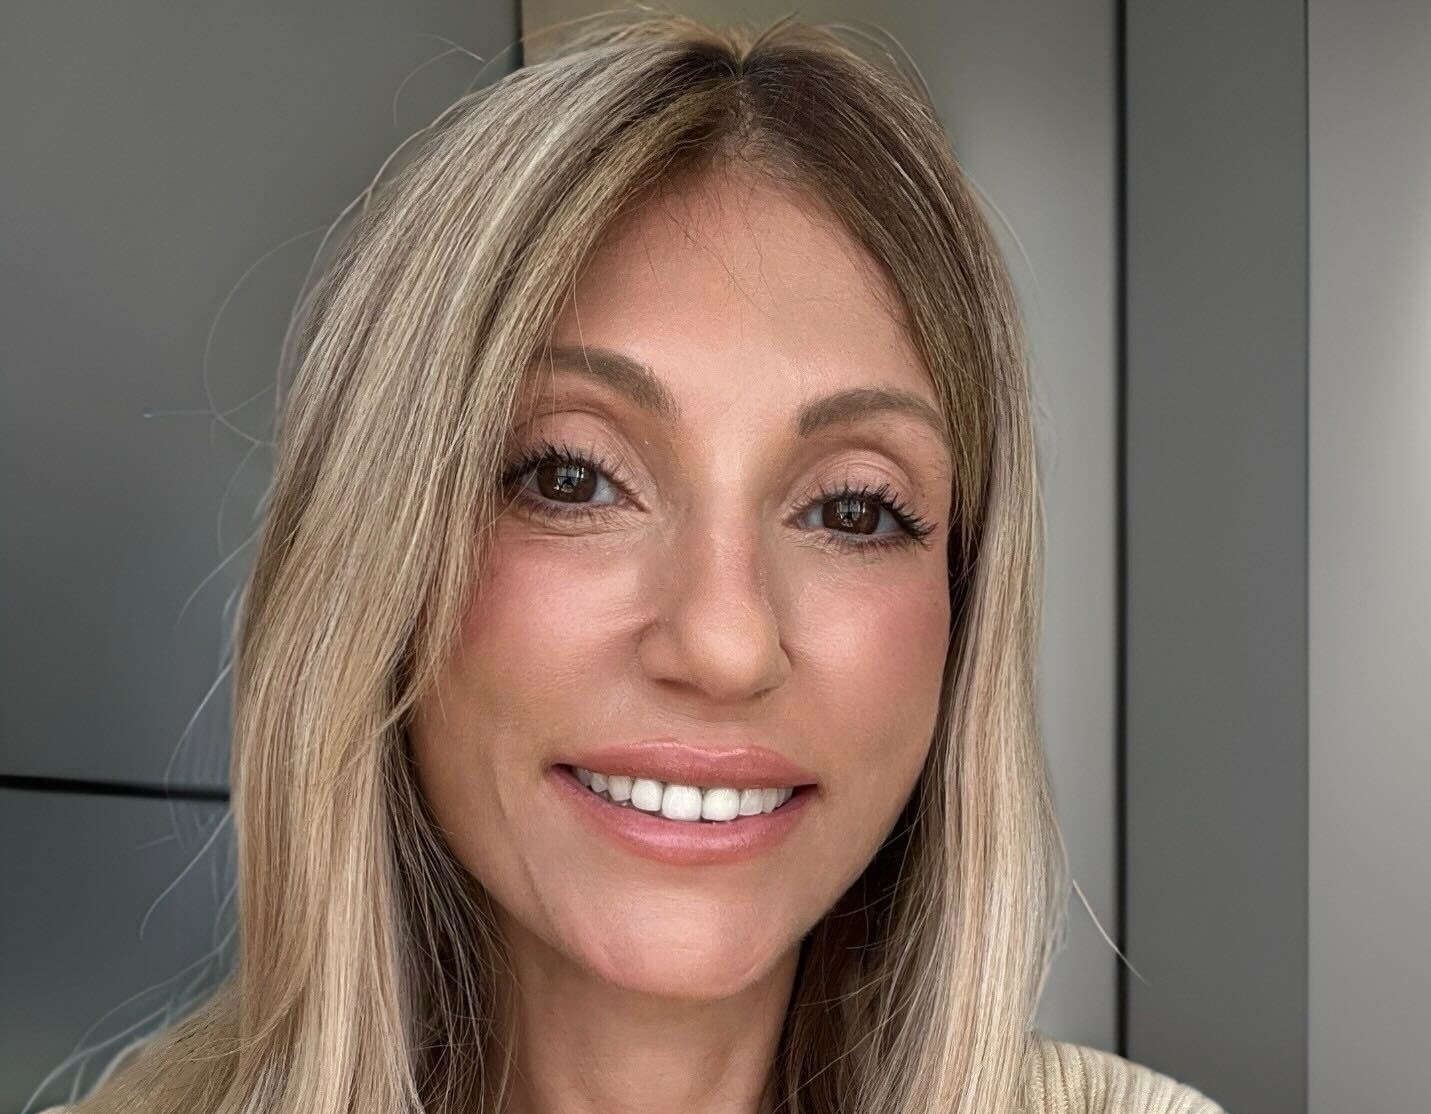 Katina Messinis leaves Exinity for UAE Sales Director role at GCEX